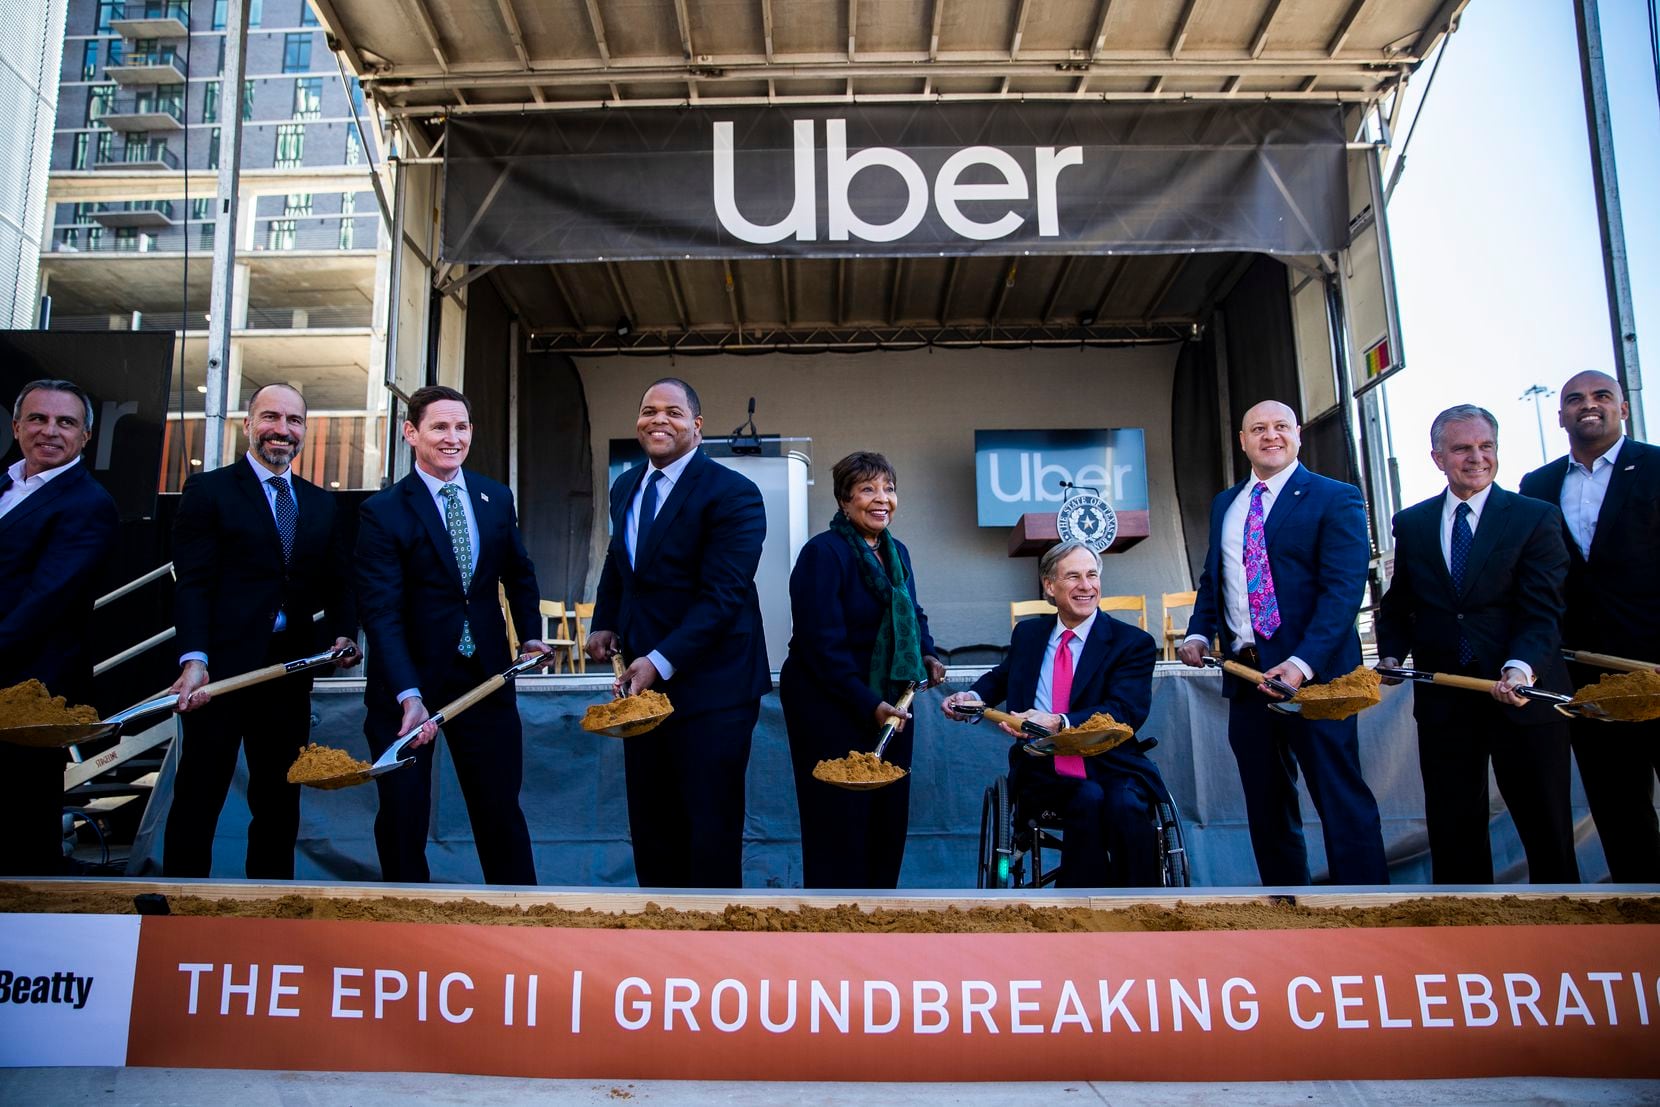 Uber CEO Dara Khosrowshahi (second from left), Dallas Mayor Eric Johnson (fourth from left), Governor Greg Abbott (fourth from right) and other city and state officials pose for a photo during a ground breaking ceremony for a new Uber Deep Ellum office on Friday, November 1, 2019 in Dallas. (Ashley Landis/The Dallas Morning News)